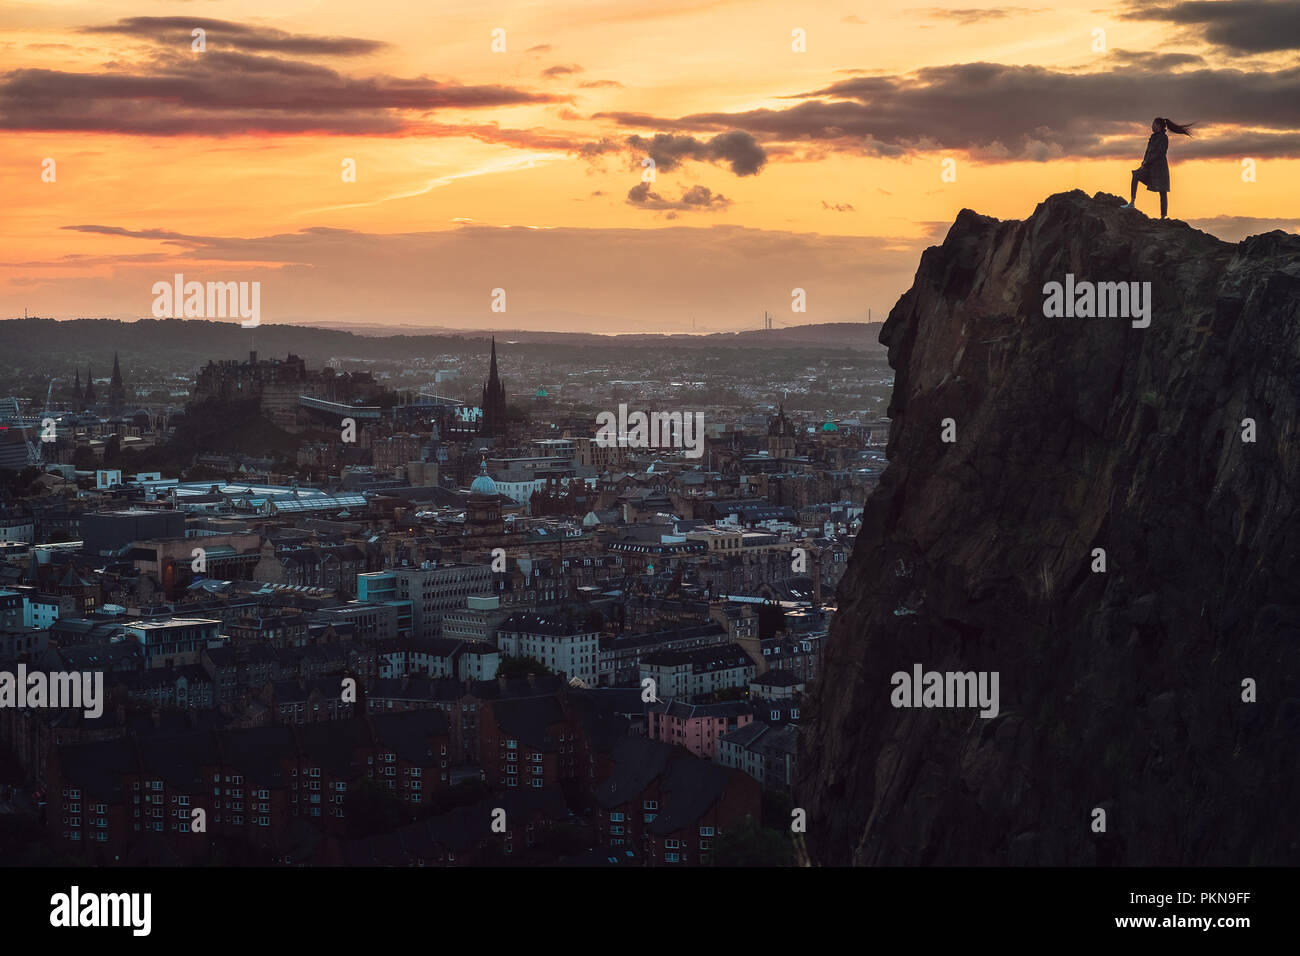 Contour of a girl standing on a rock and looking from above to a sunset city, Edinburgh, Scotland, United Kingdom Stock Photo